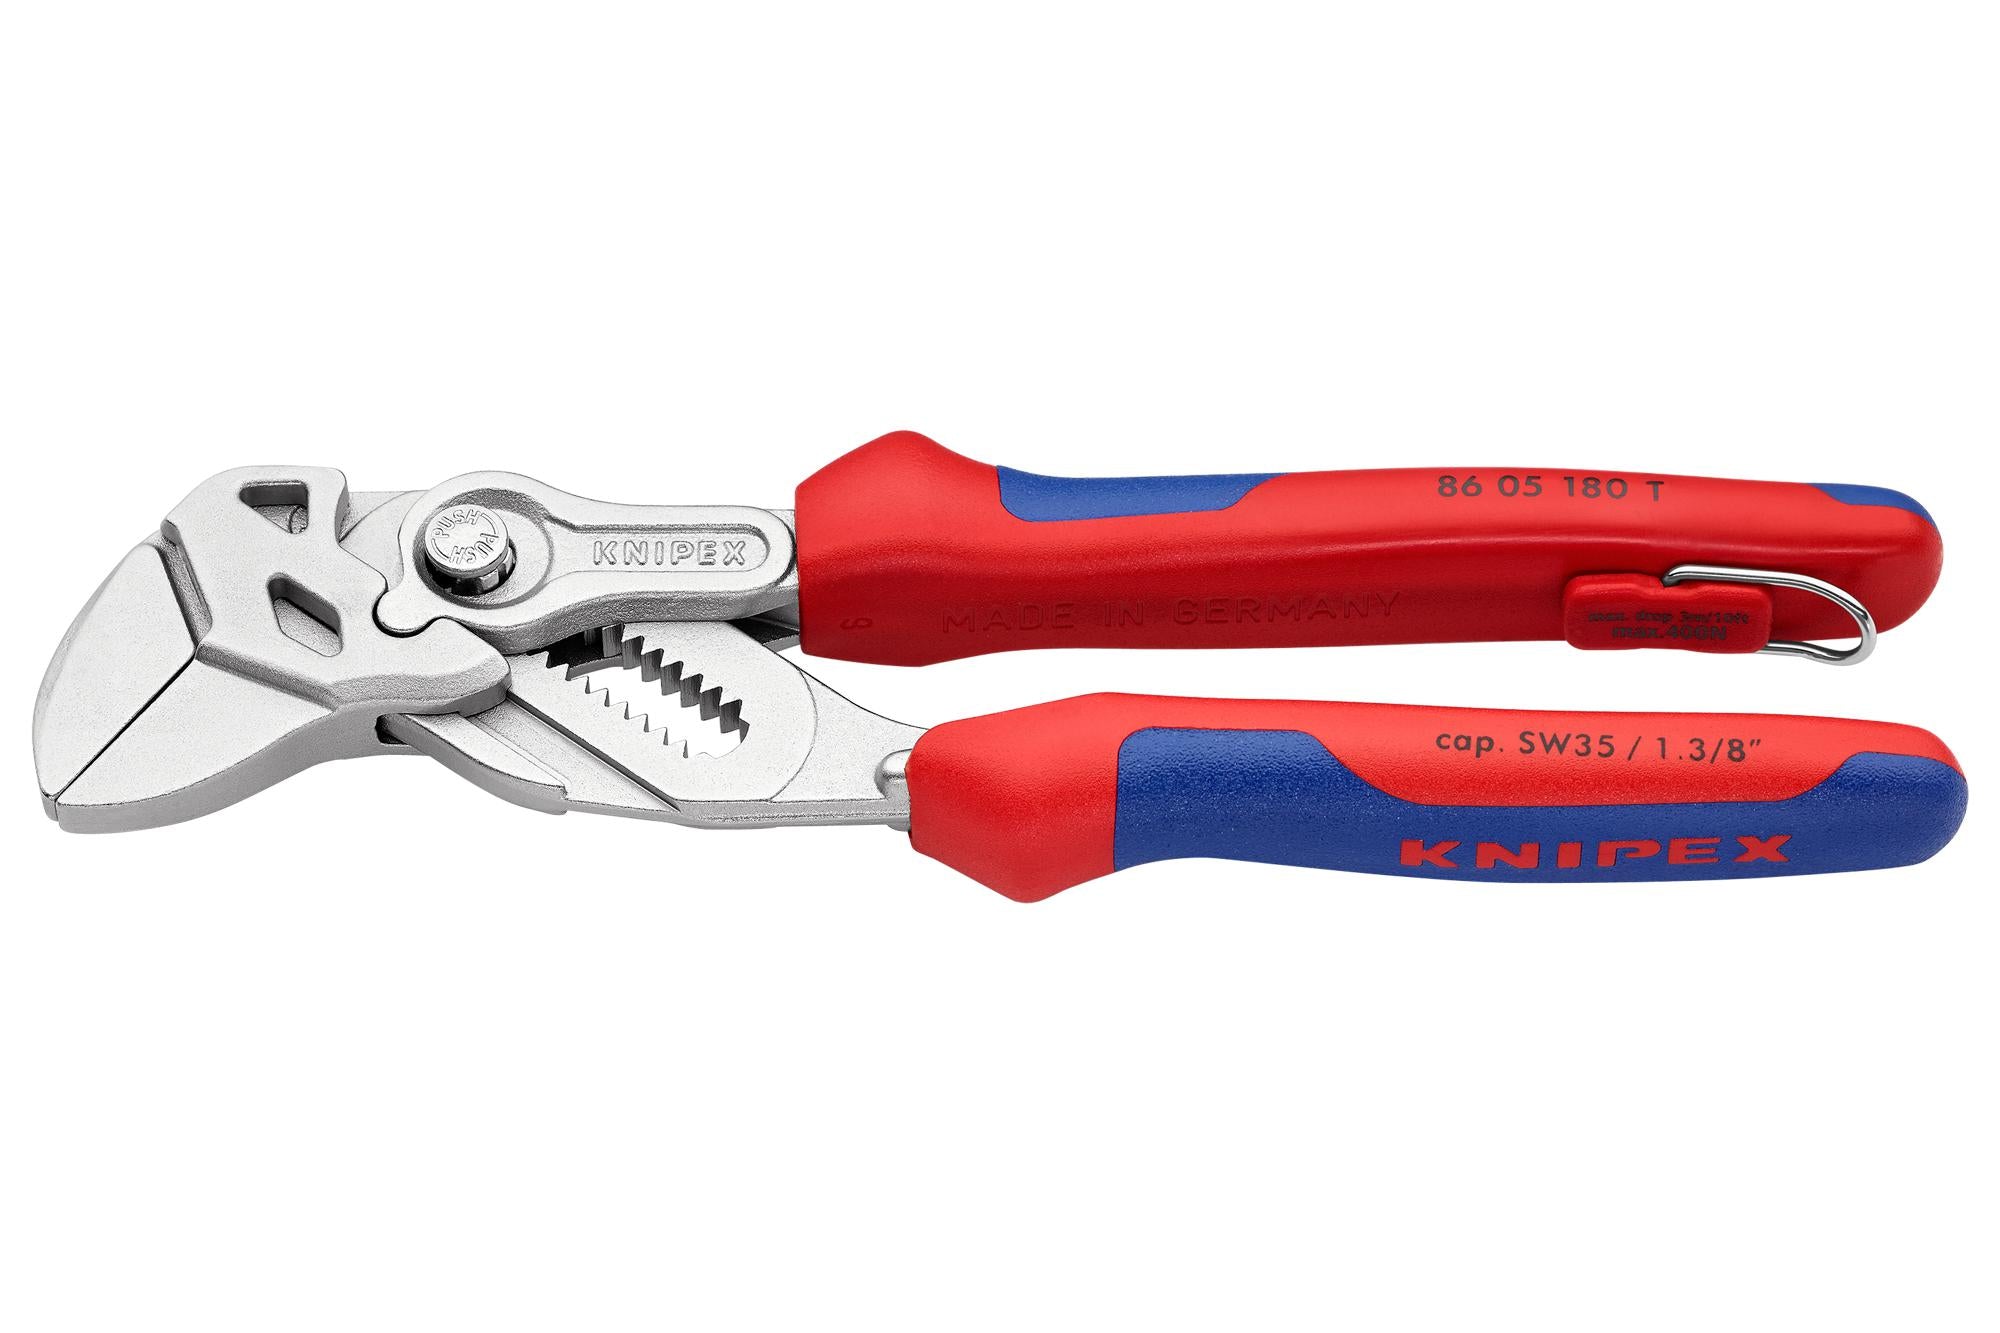 86 05 180 T PLIER WRENCH, WATER PUMP, 180MM KNIPEX